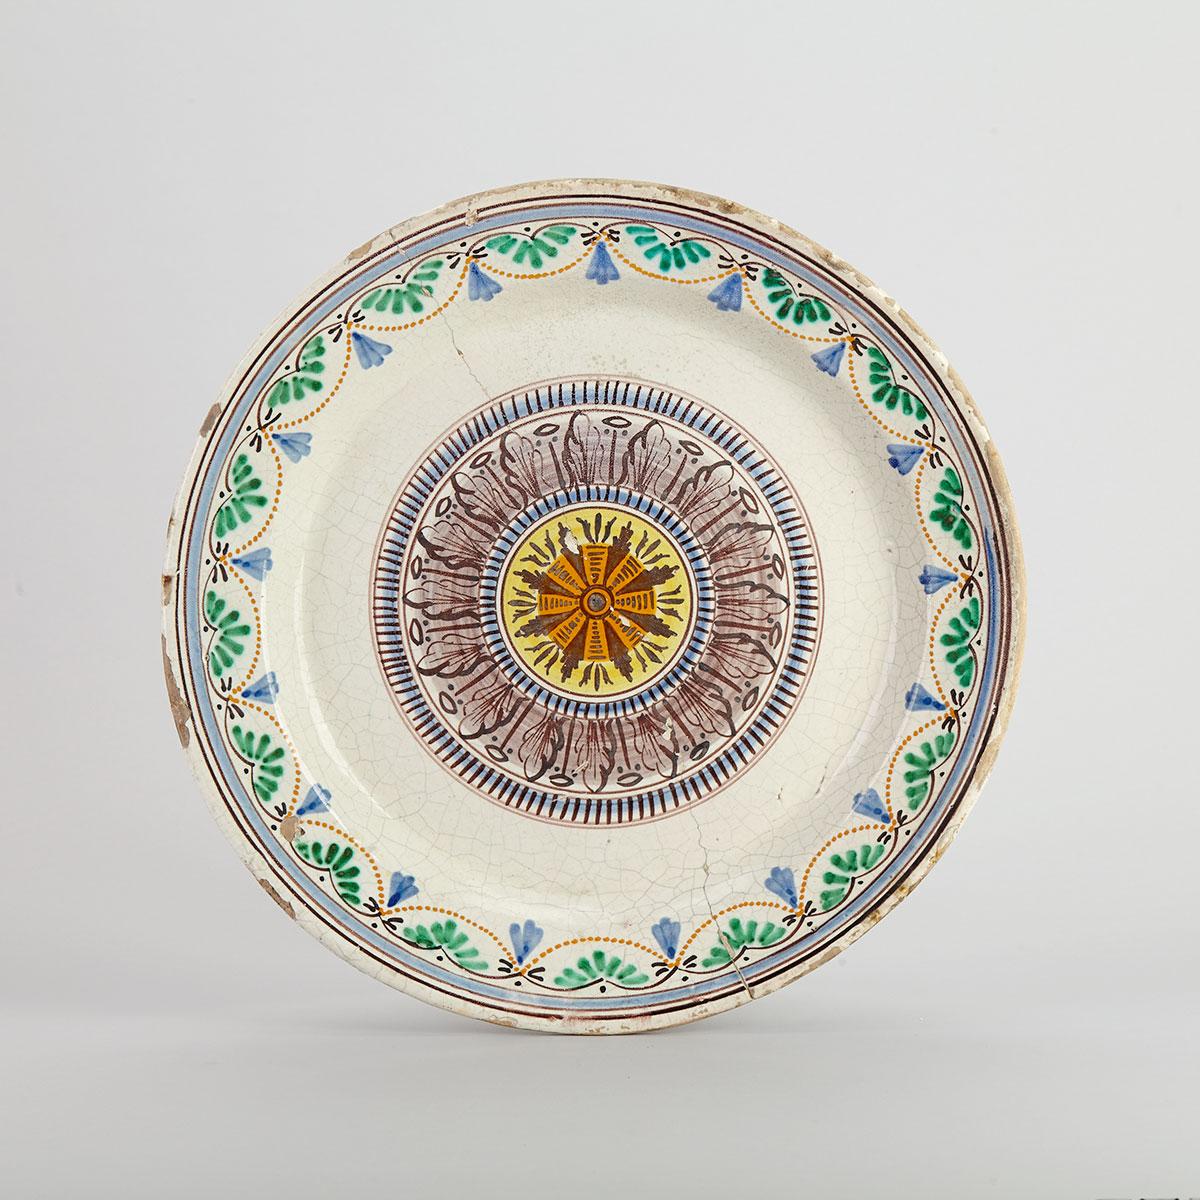 Maiolica Charger, 18th century